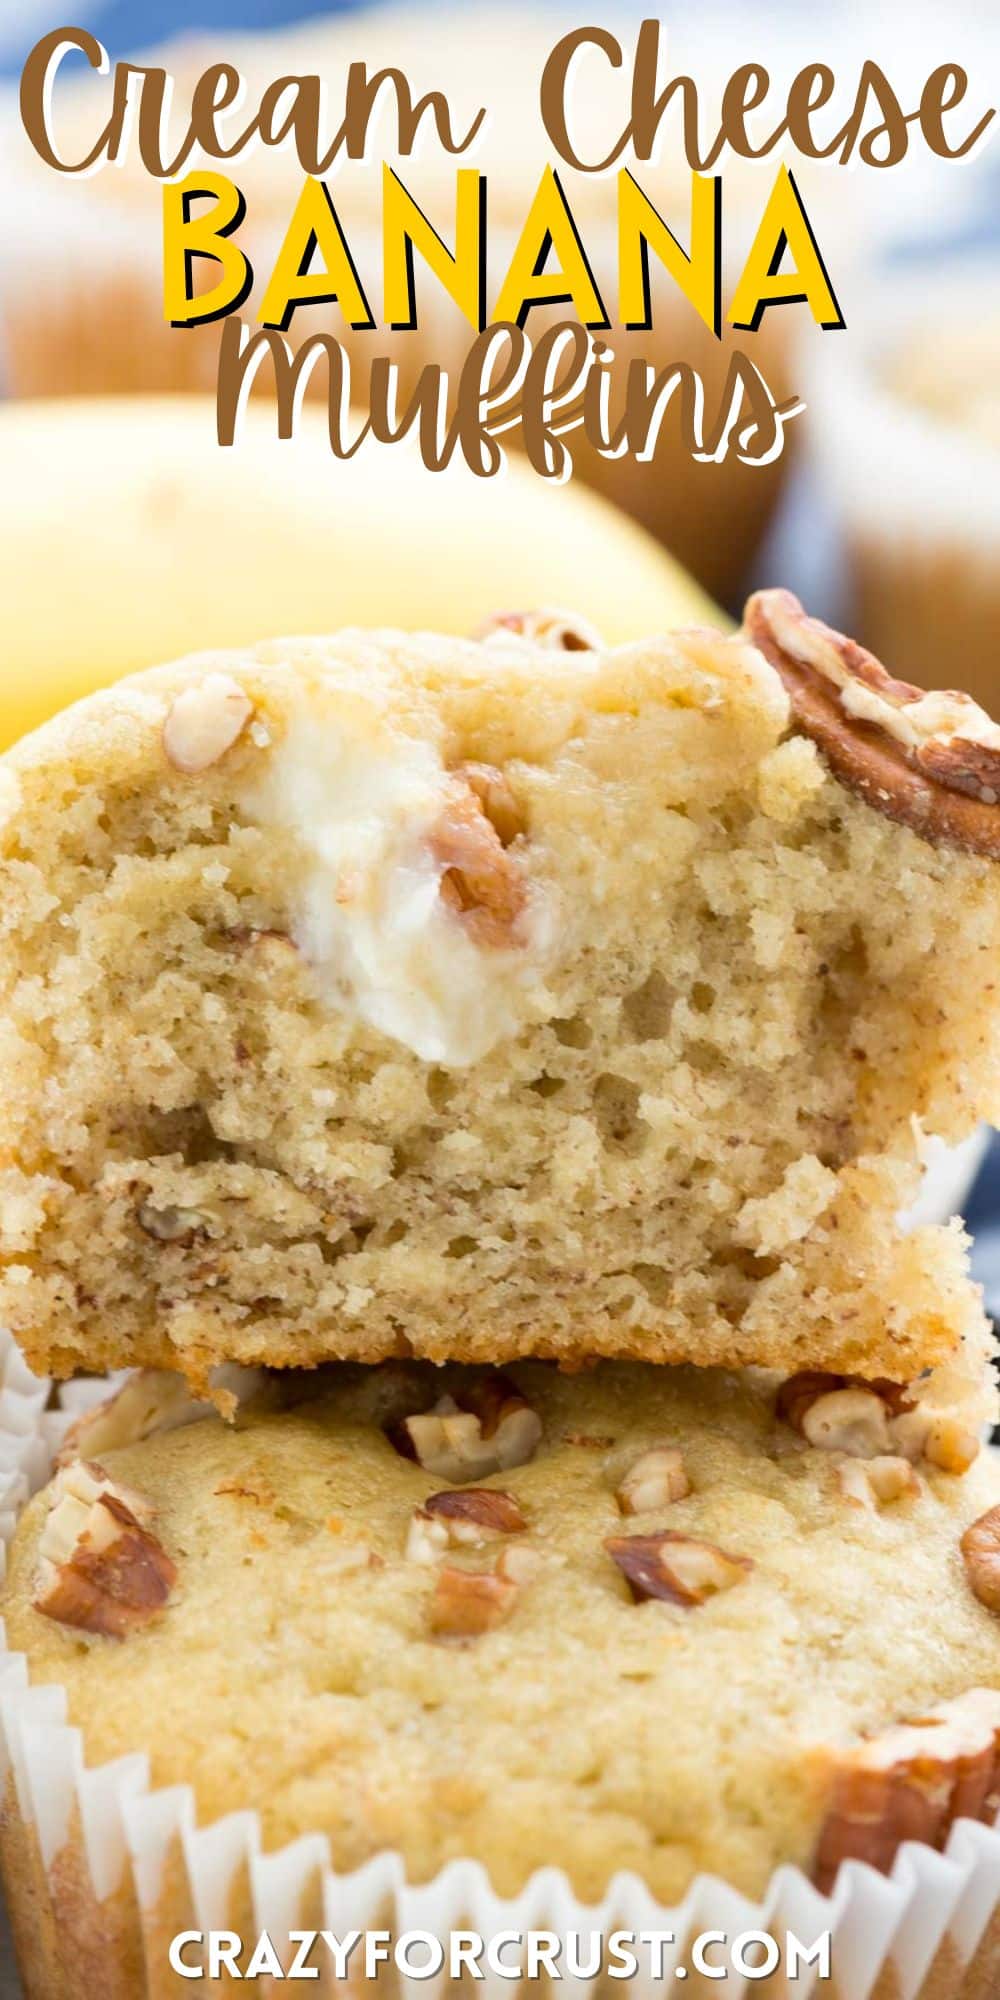 stacked banana muffins with cream cheese and pecan baked in with words on the image.